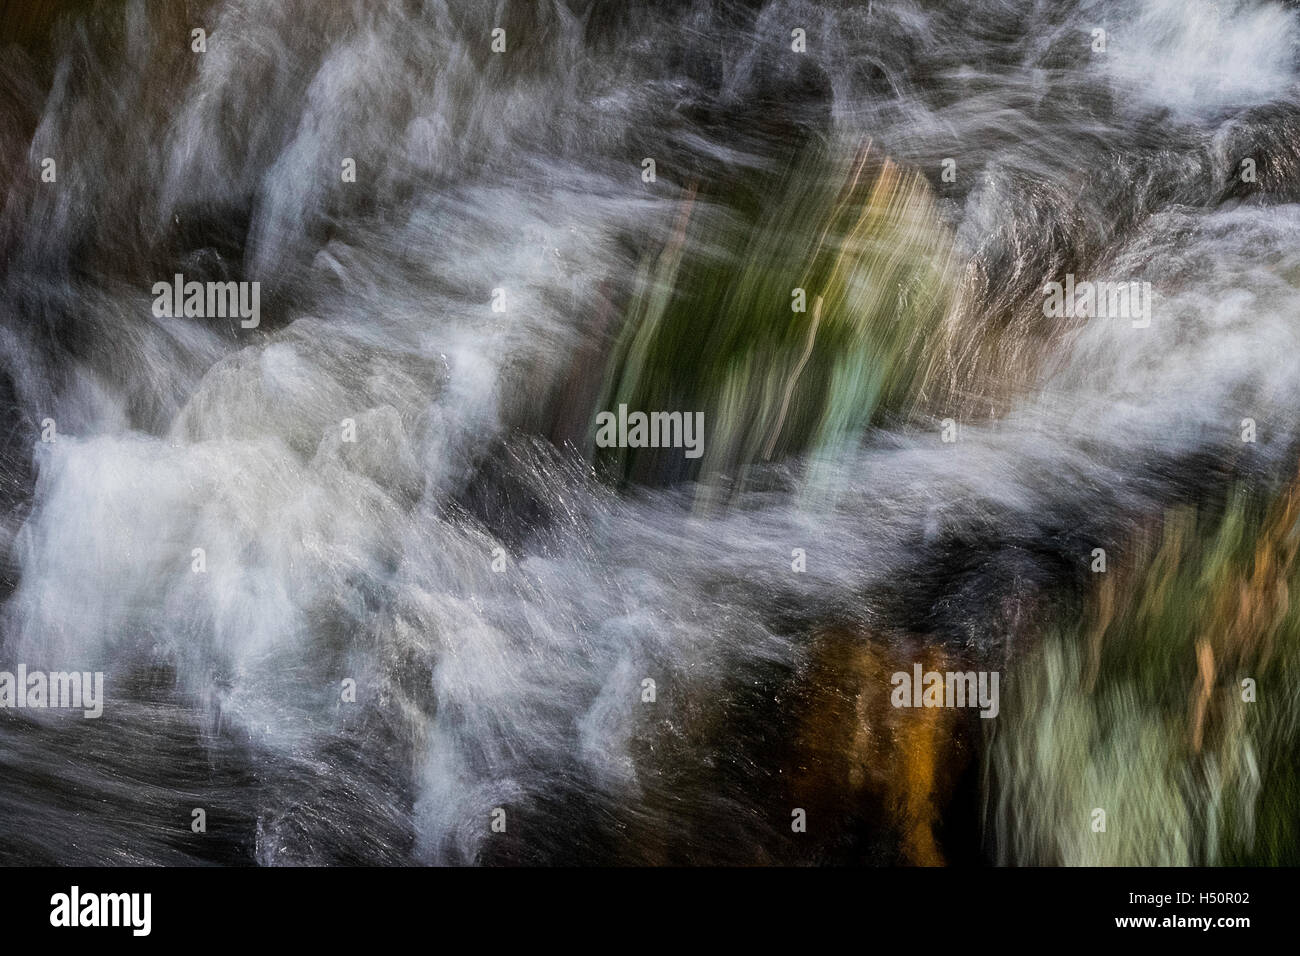 Water, moving, abstract, Stock Photo